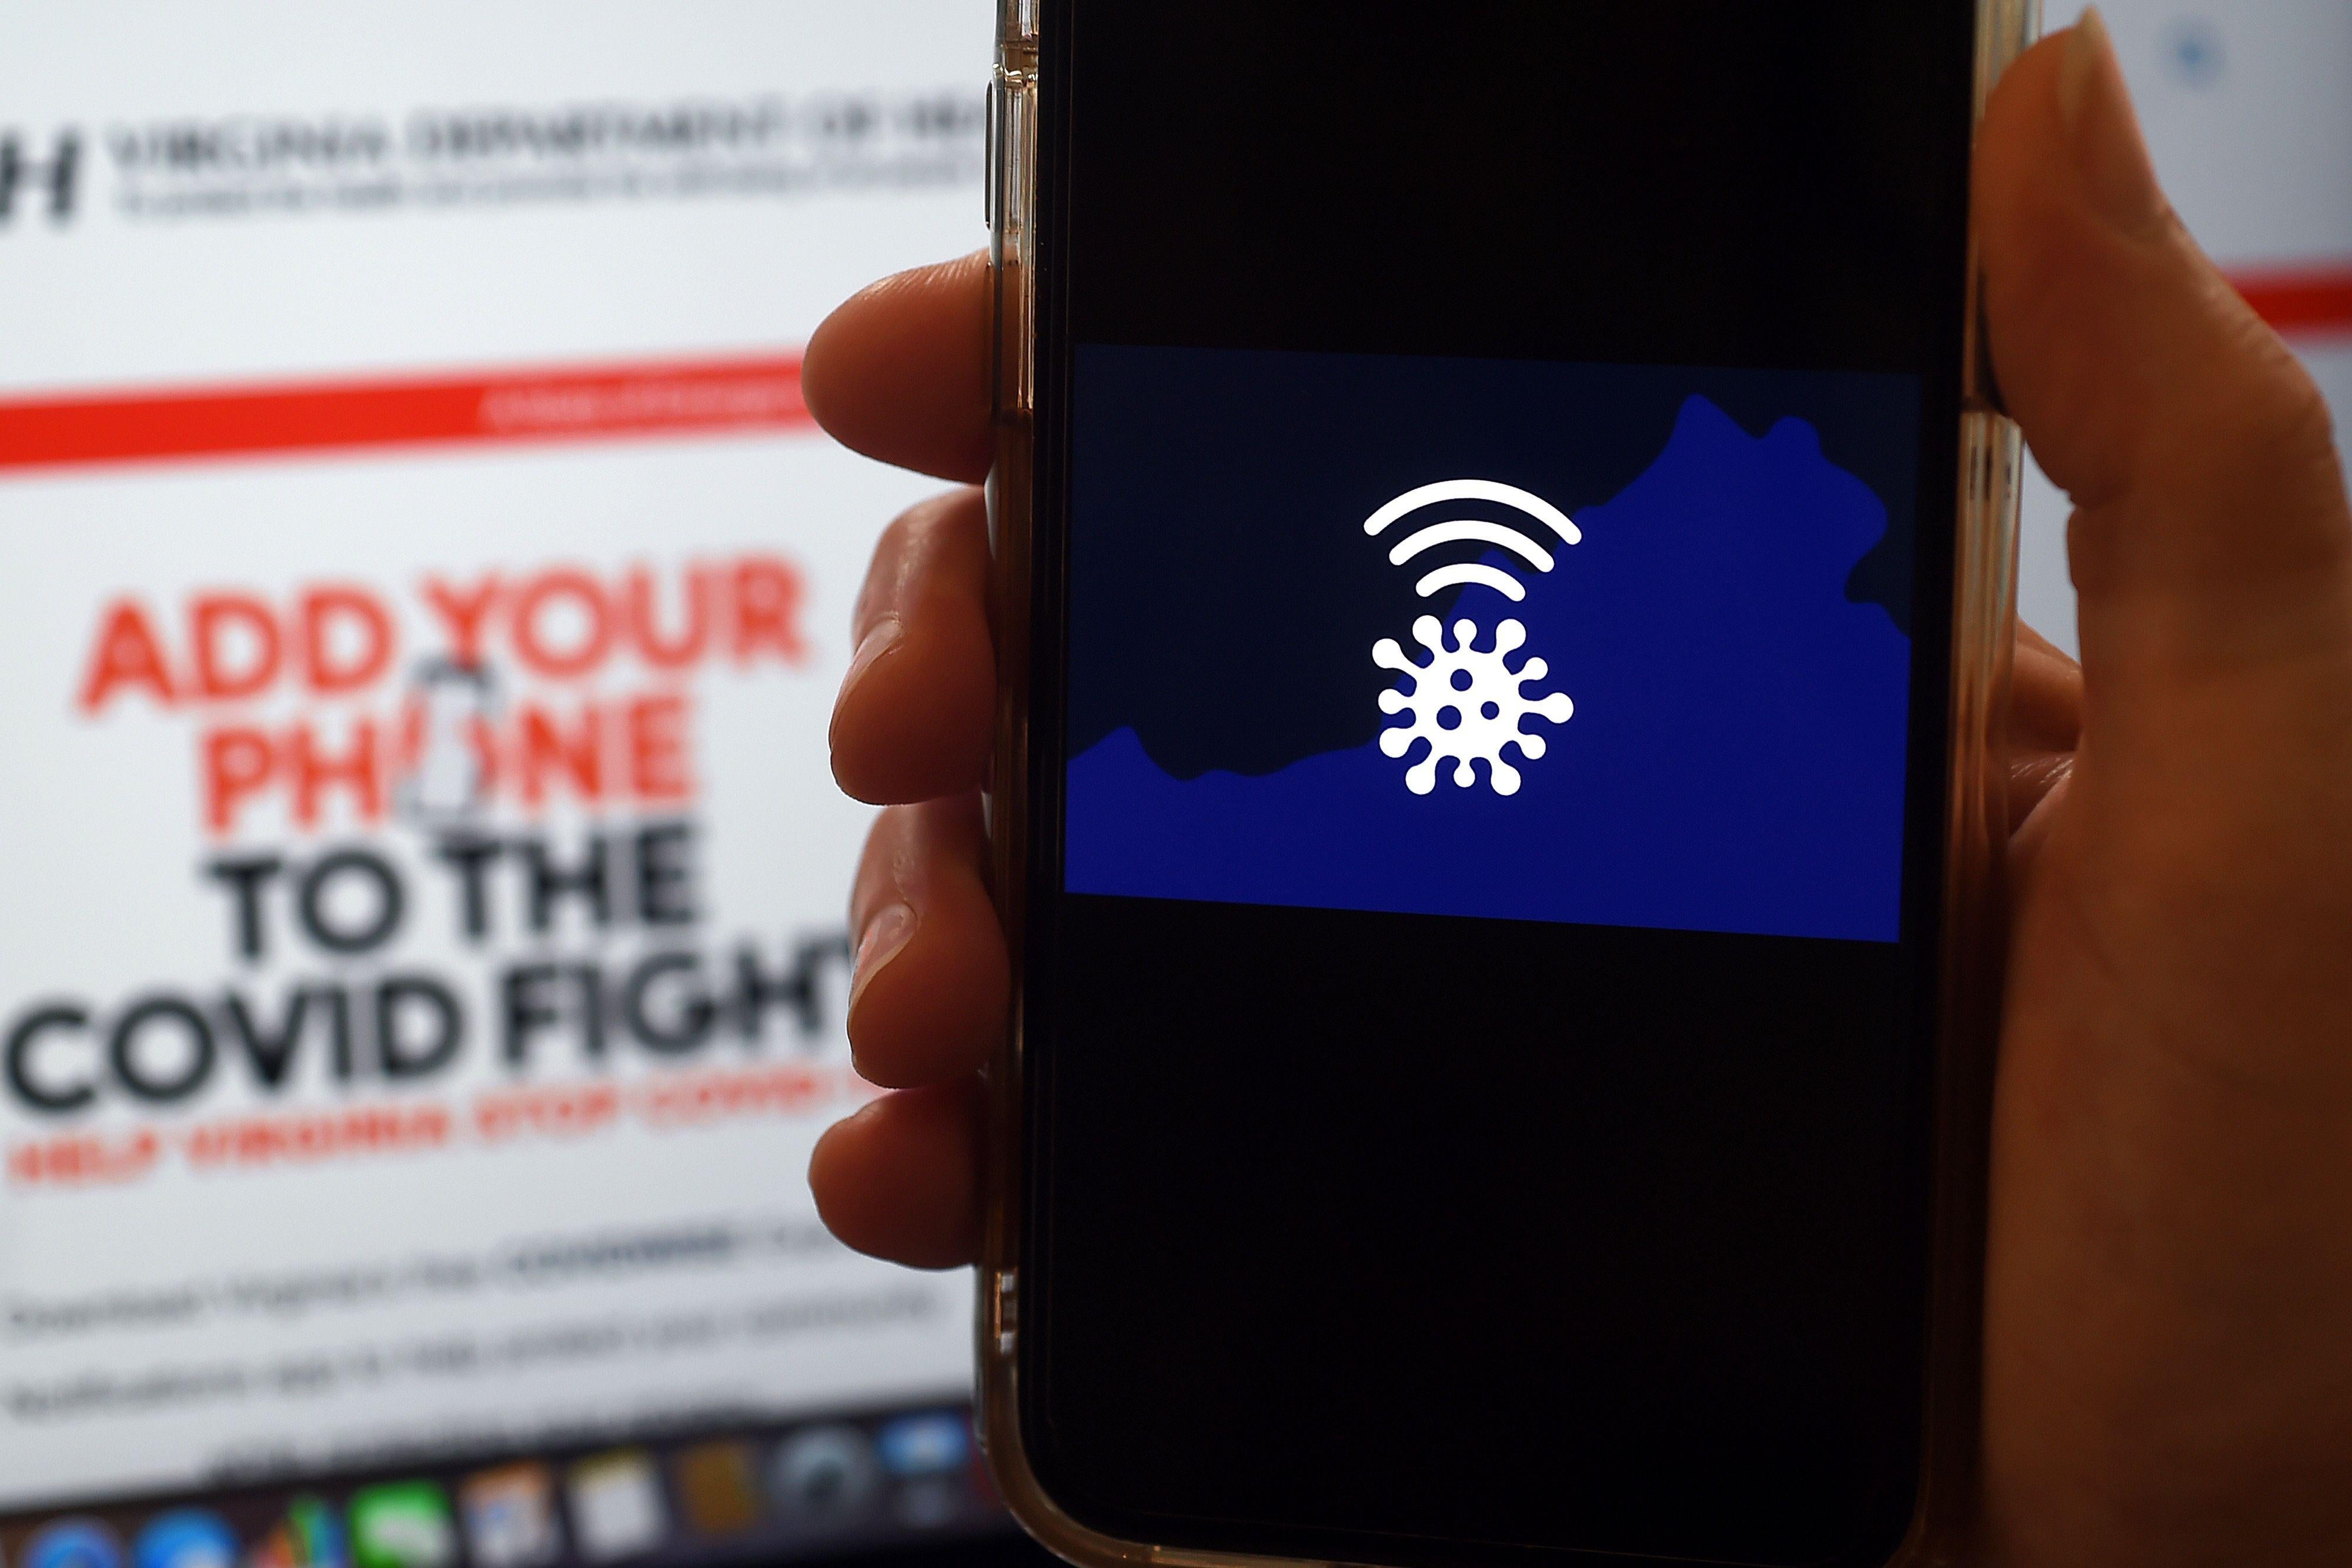 A hand holds a smartphone displaying the Covidwise app logo, while in the background a screen reads "Add your phone to the COVID fight."